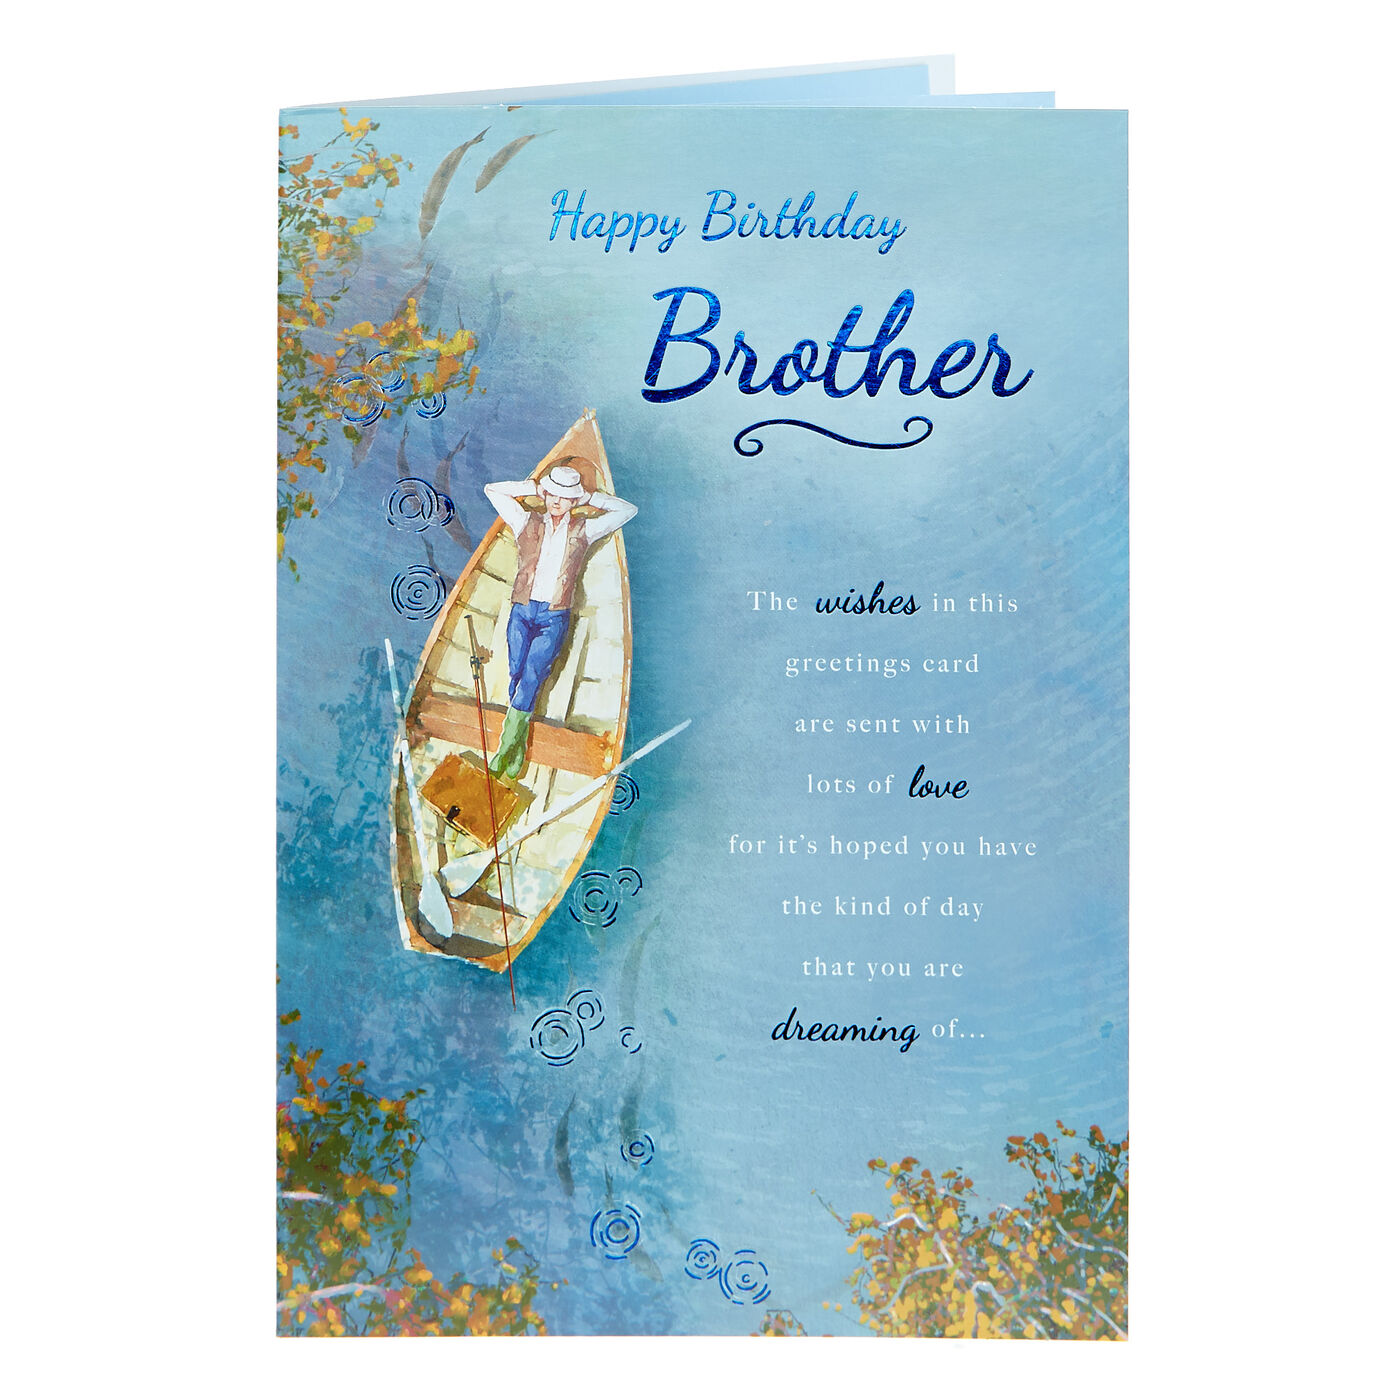 Buy Birthday Card - Brother Gone Fishing for GBP 0.99